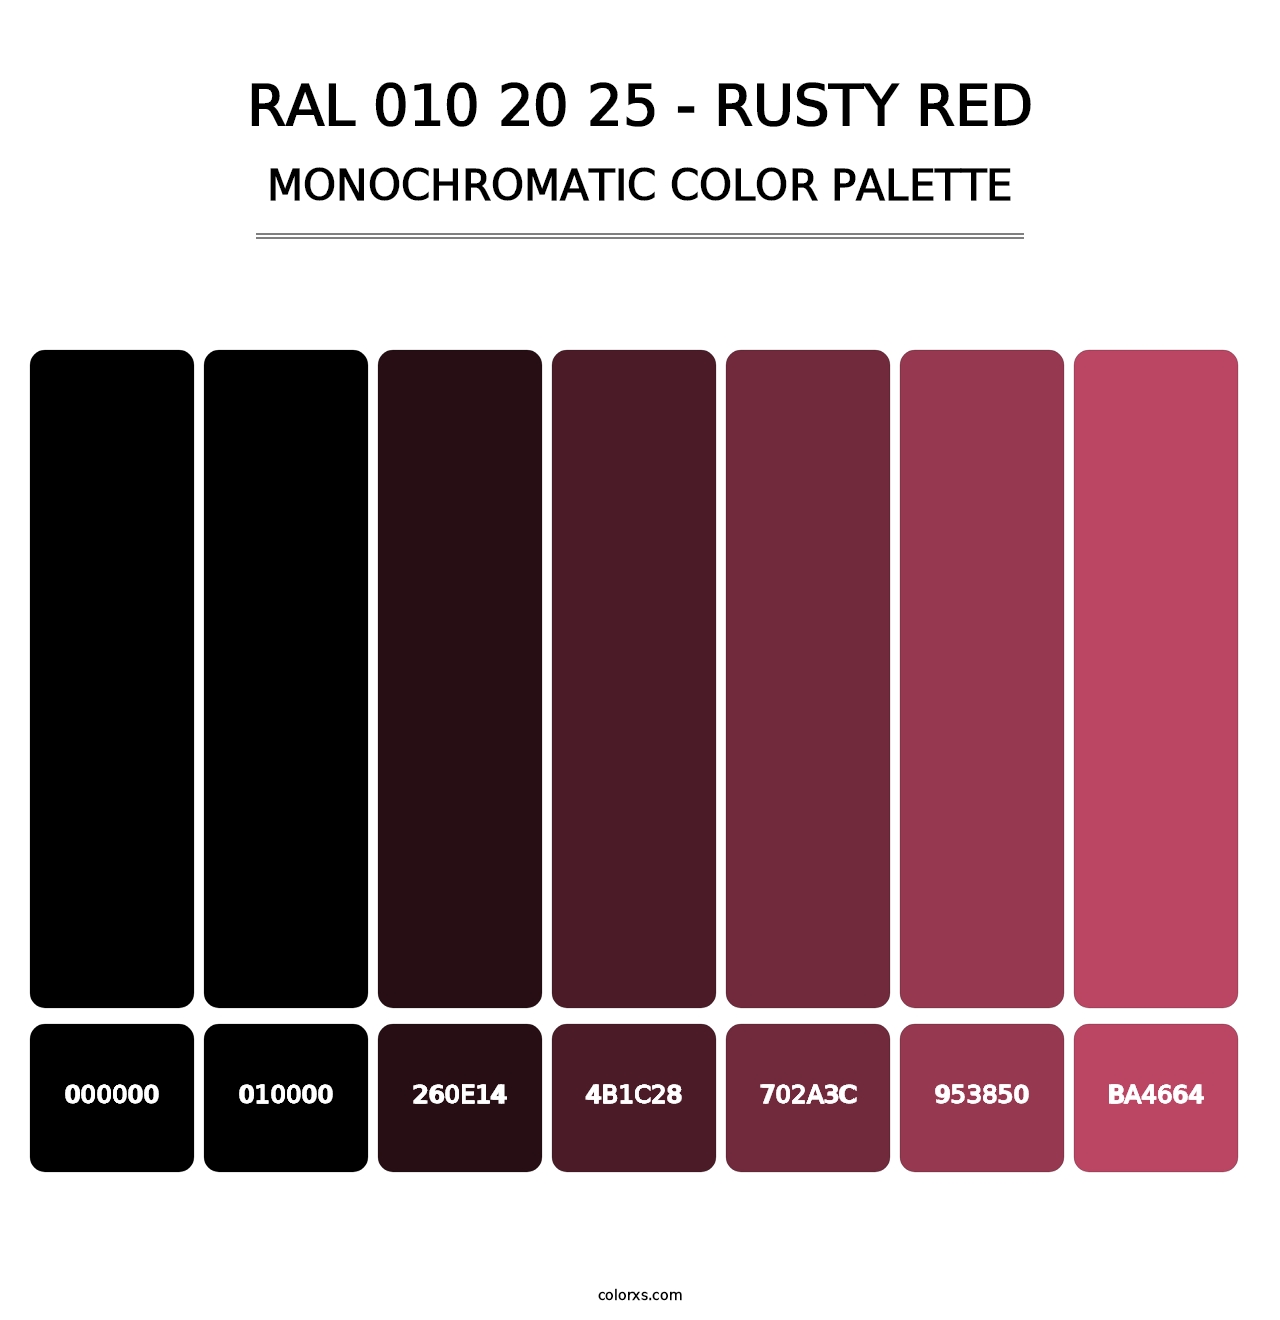 RAL 010 20 25 - Rusty Red - Monochromatic Color Palette